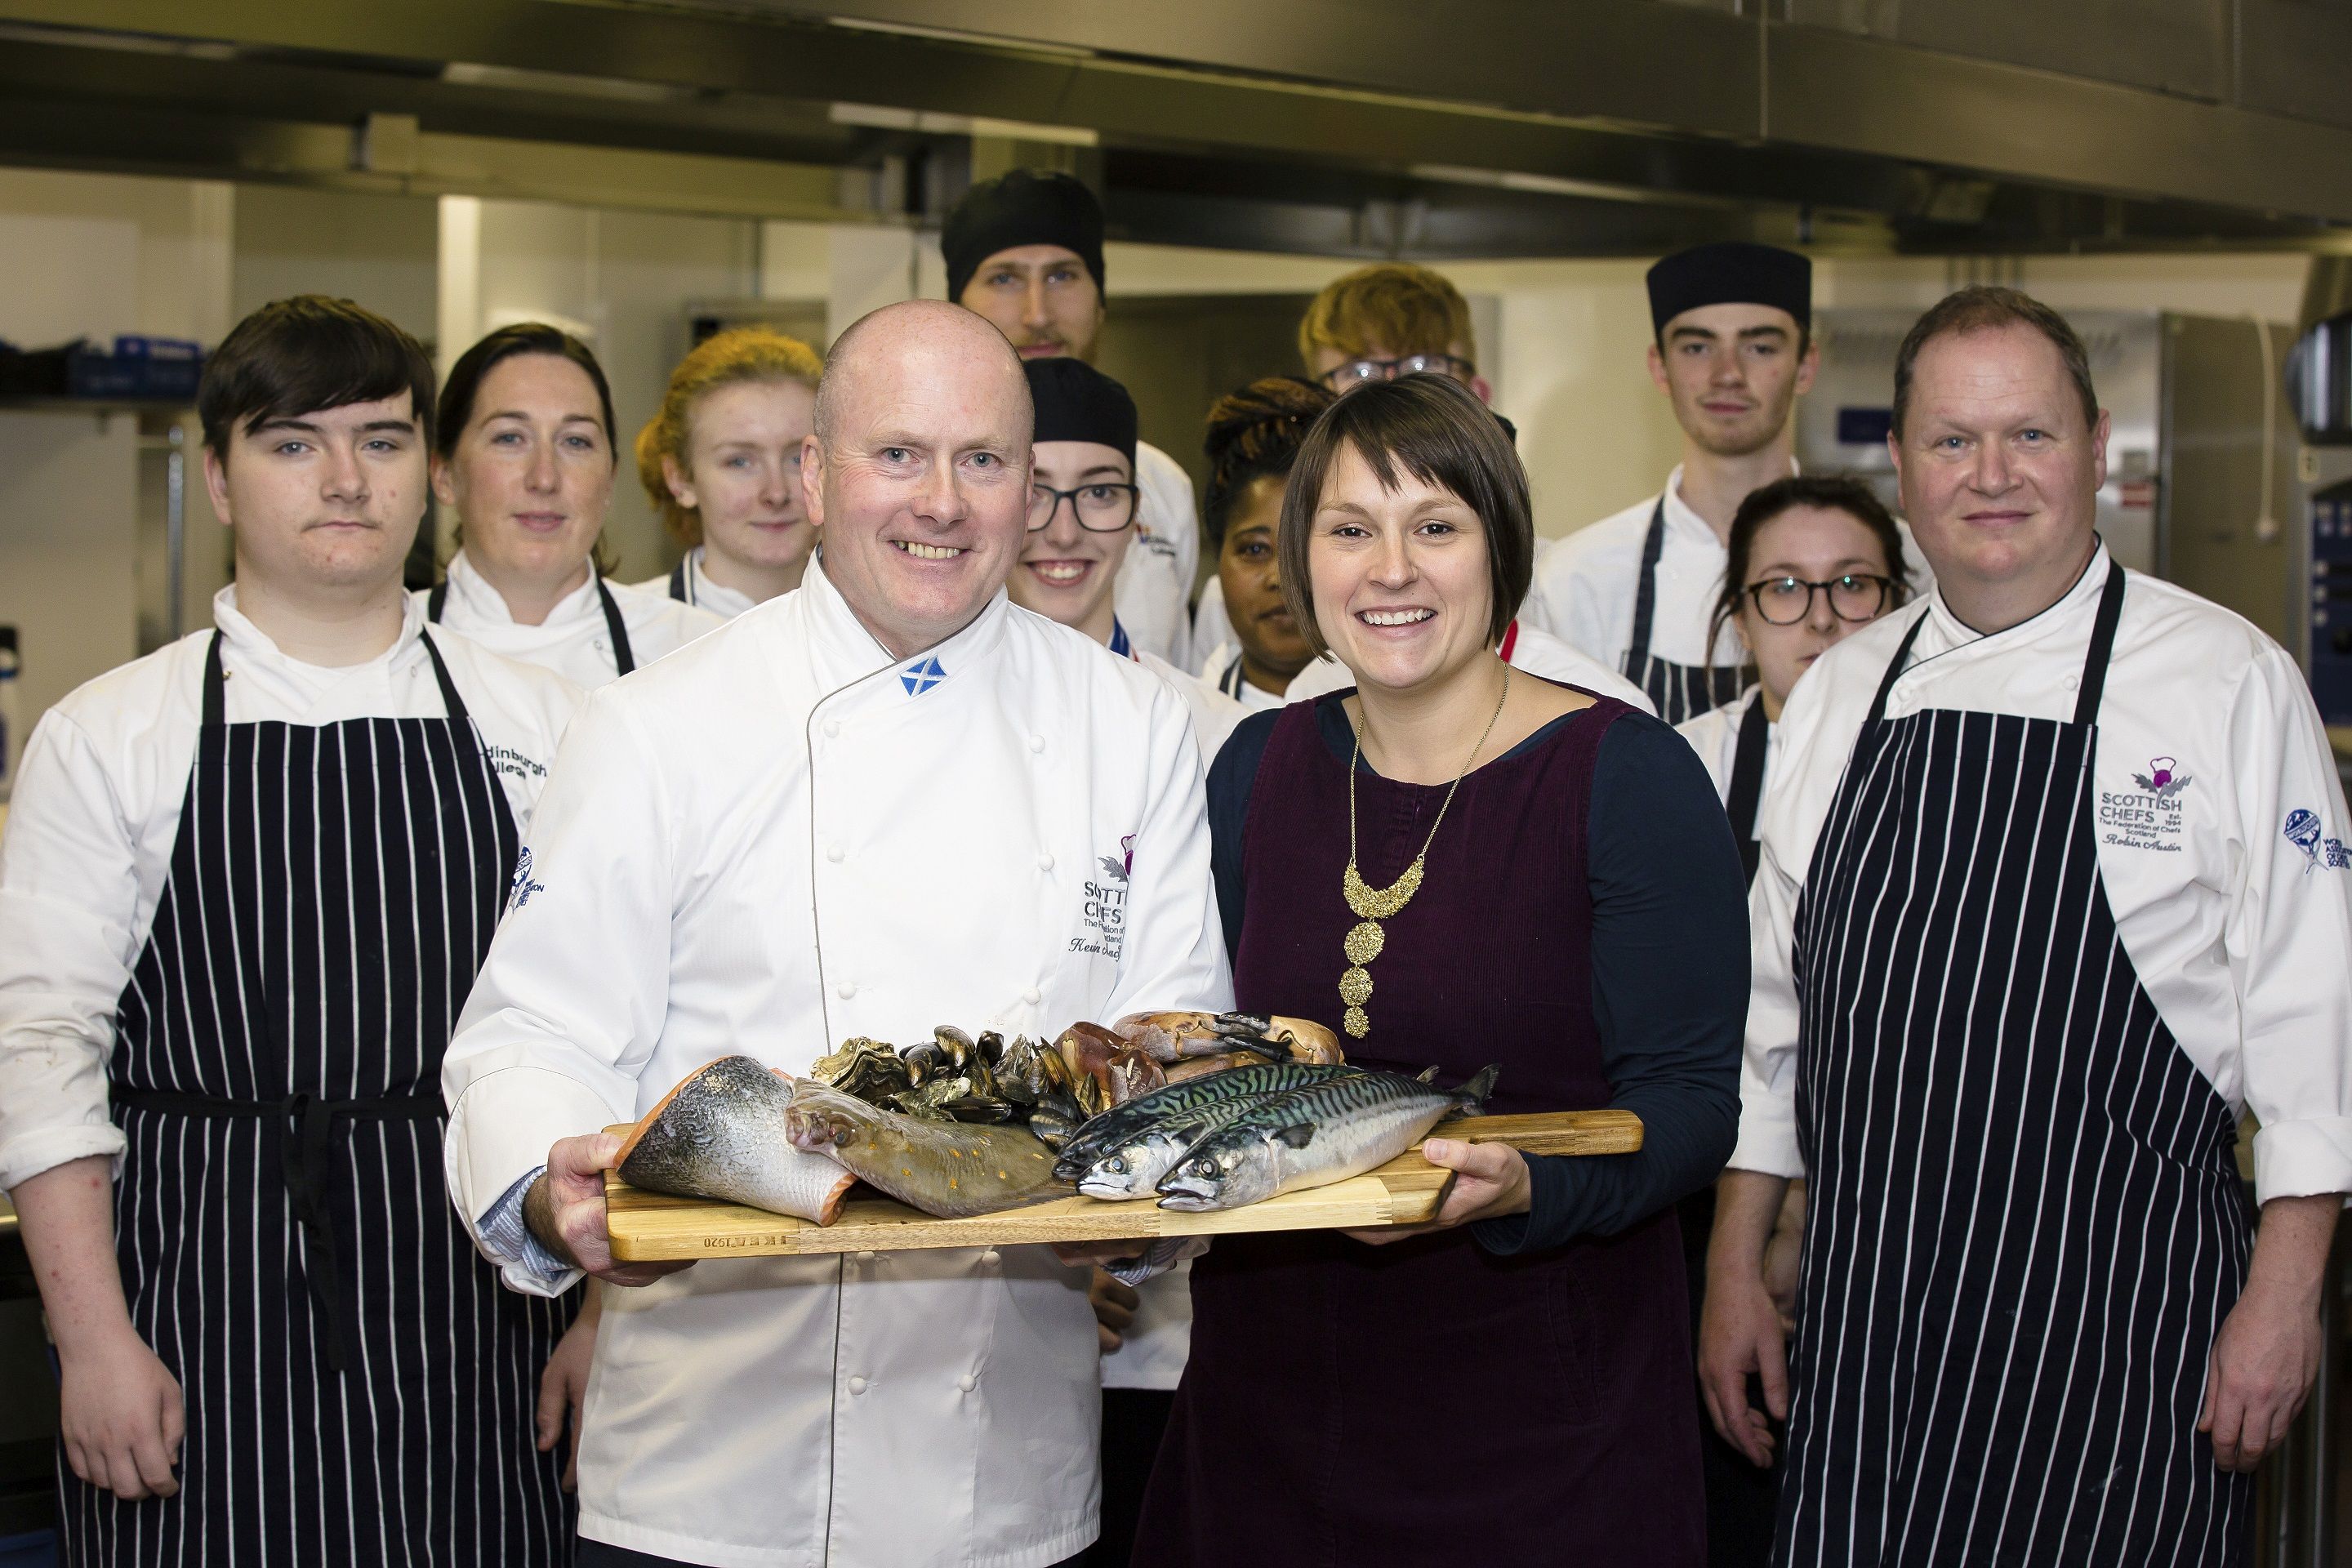 Kevin MacGillivray, president of the Scottish Chefs, with Clare Dean of Seafood Scotland